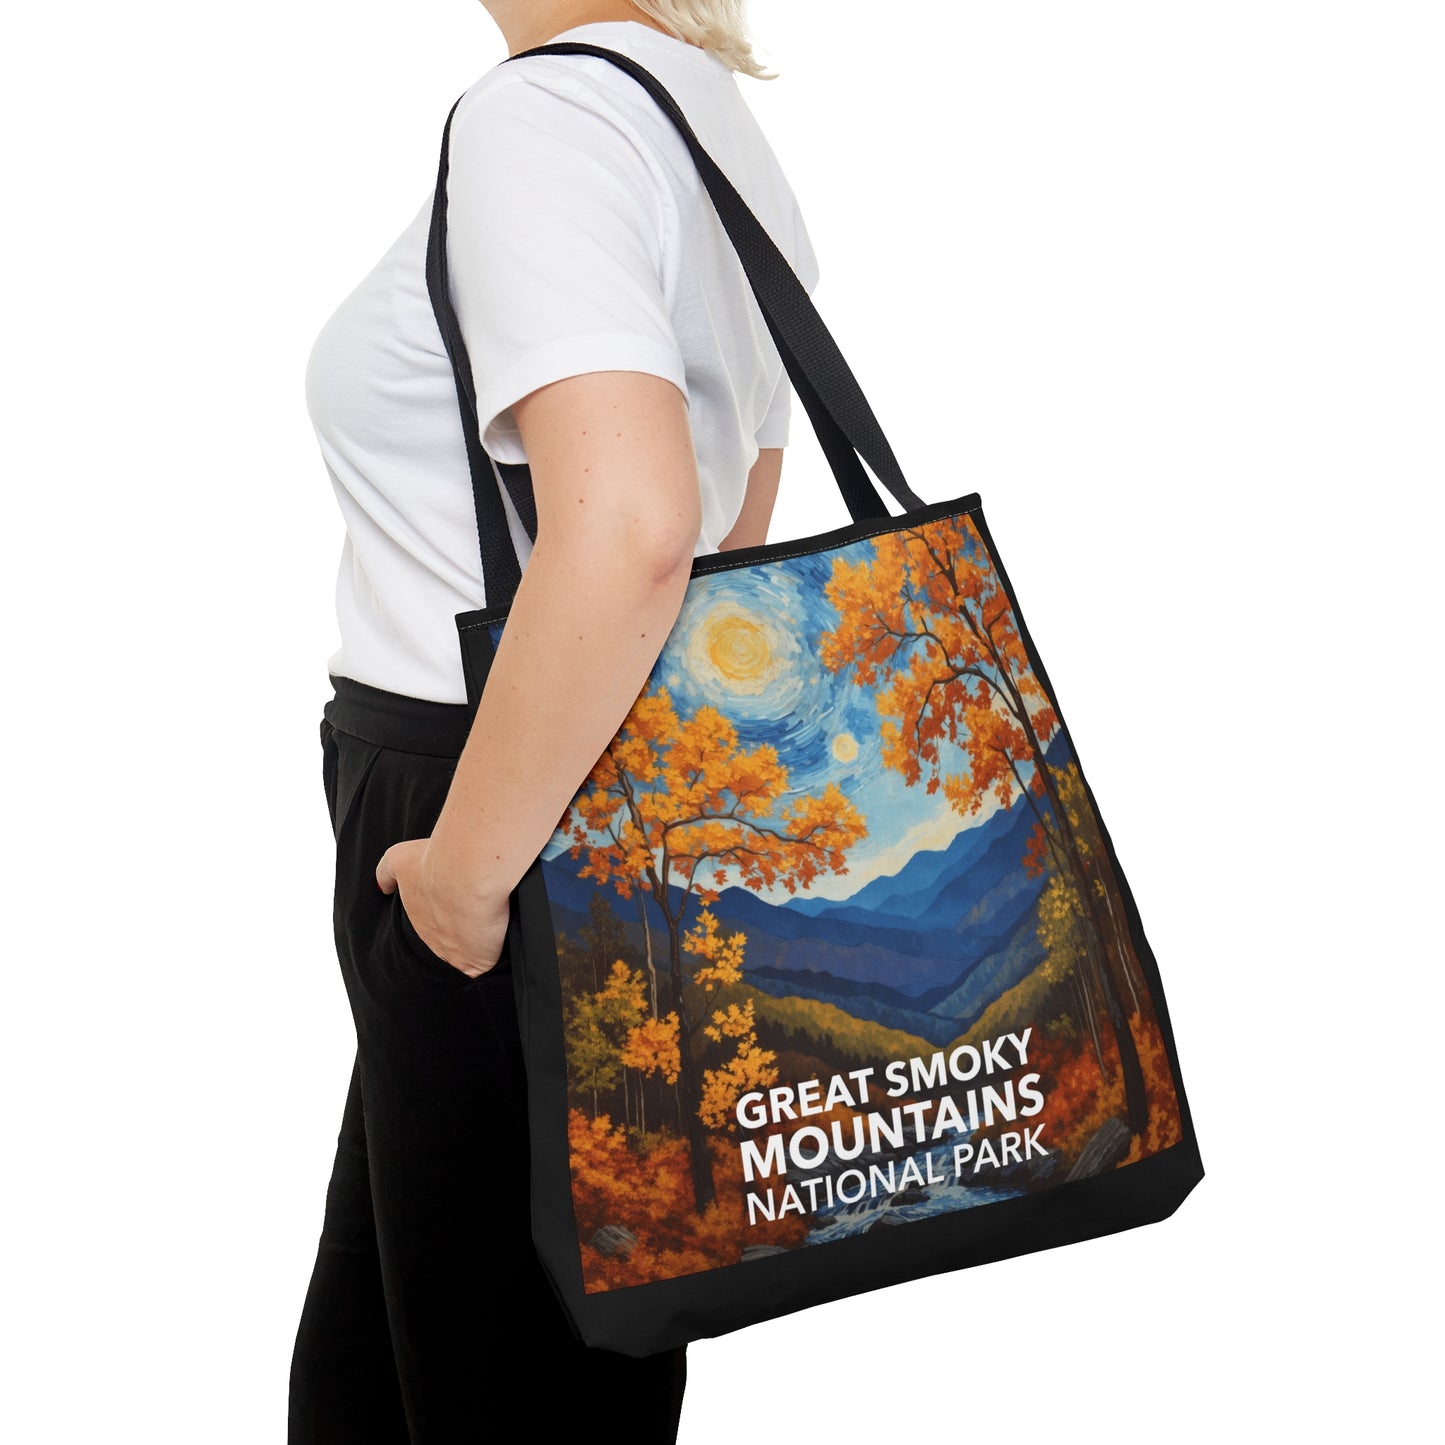 Great Smoky Mountains National Park Tote Bag - The Starry Night